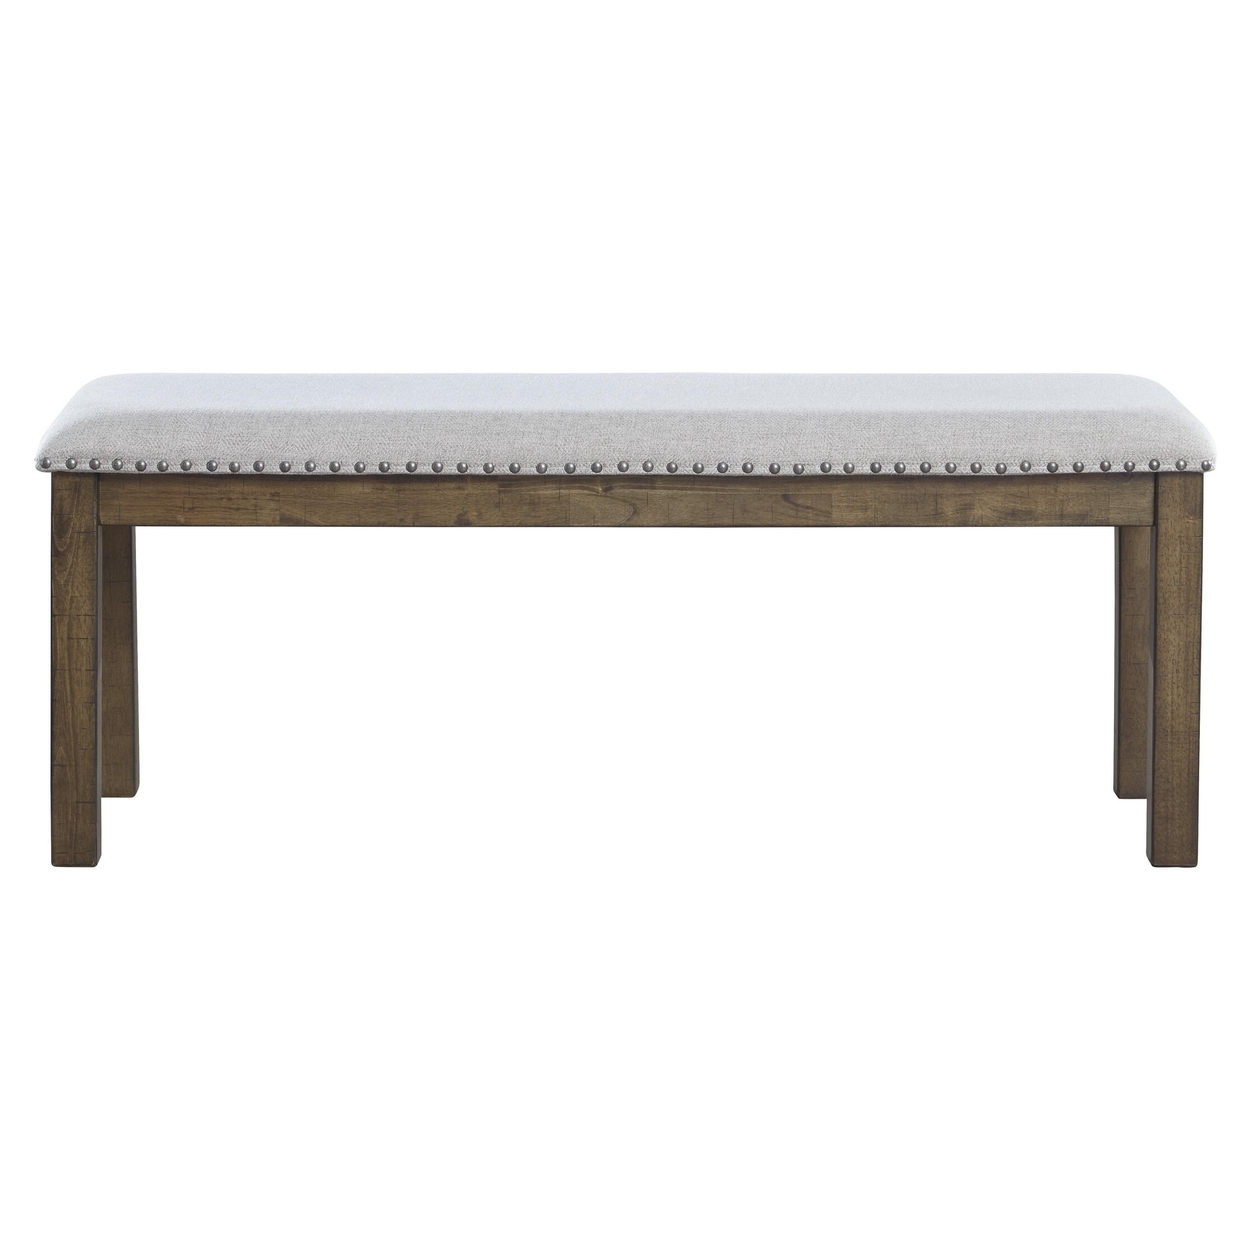 Nailhead Trim Wooden Dining Bench With Fabric Upholstery, Brown And Gray- Saltoro Sherpi